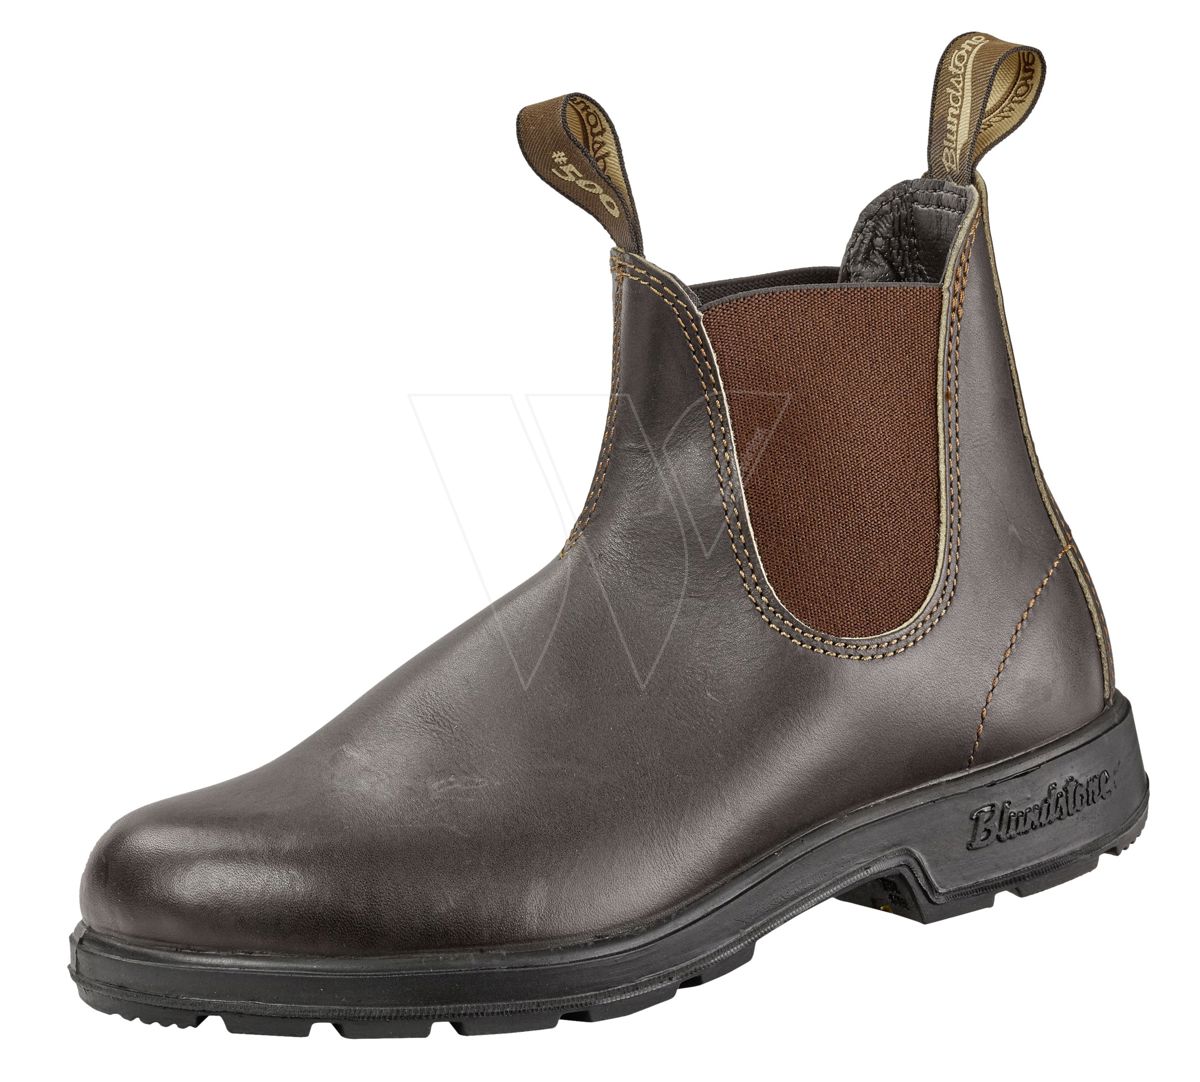 Blundstone 500 shoes size 48